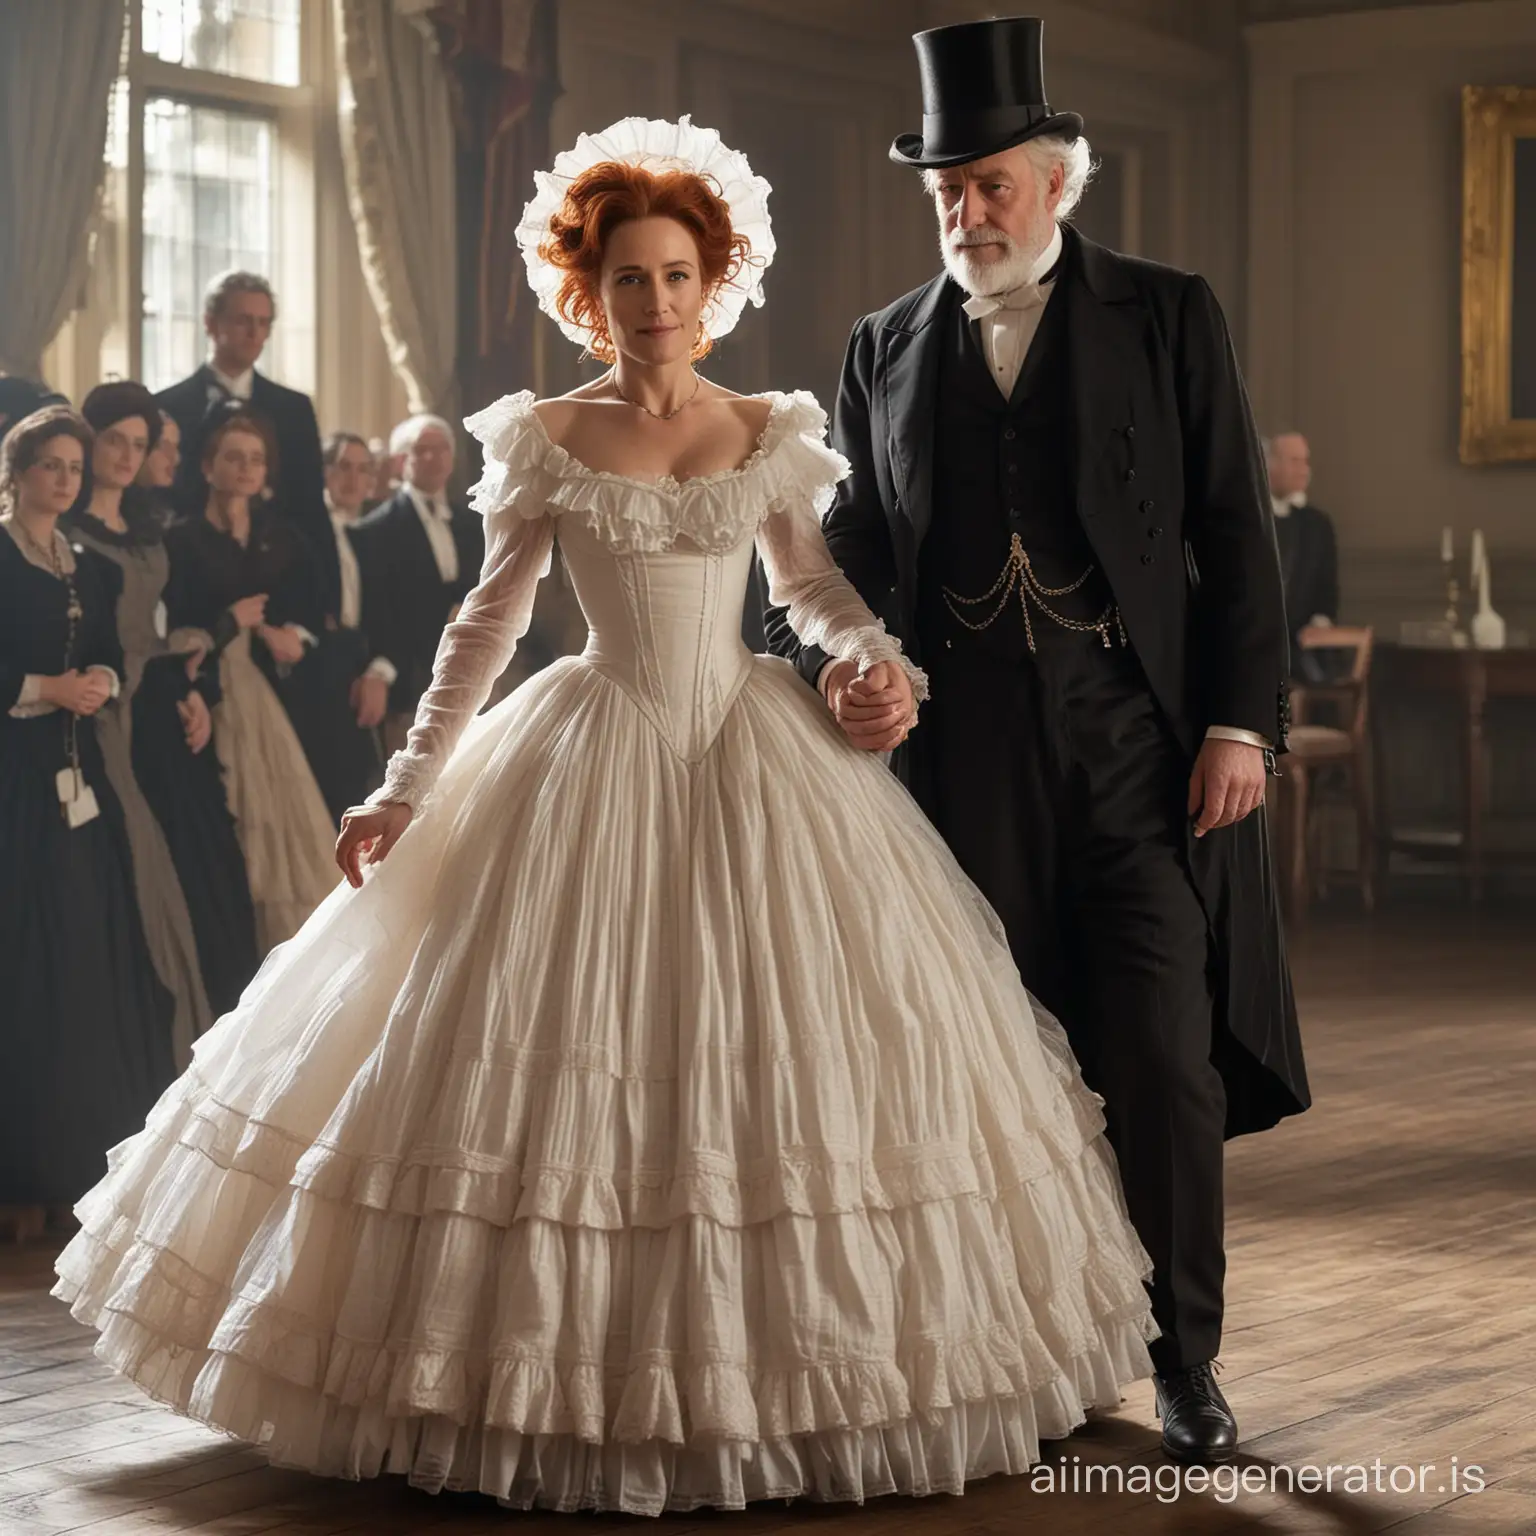 Elegant-RedHaired-Gillian-Anderson-in-Victorian-Attire-Dancing-with-Her-Suitor